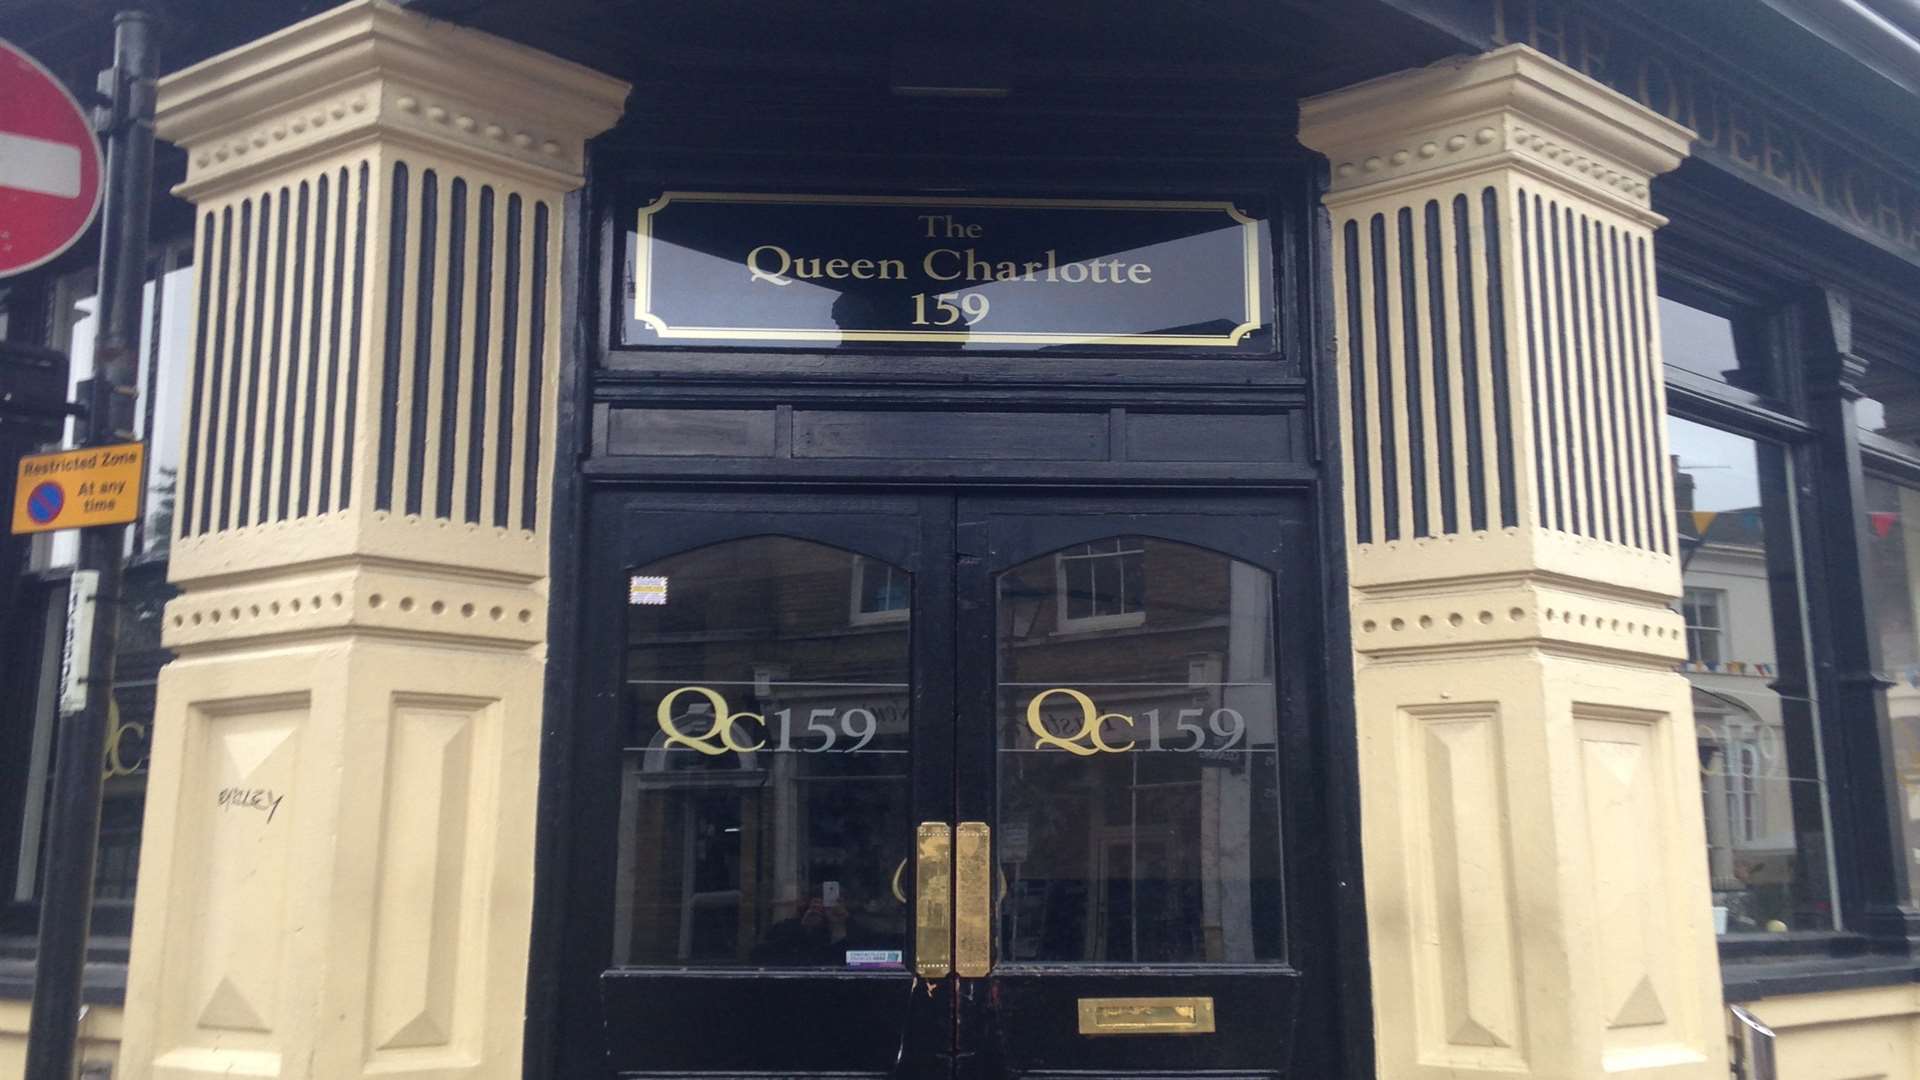 The Queen Charlotte pub in High Street, Rochester has closed down